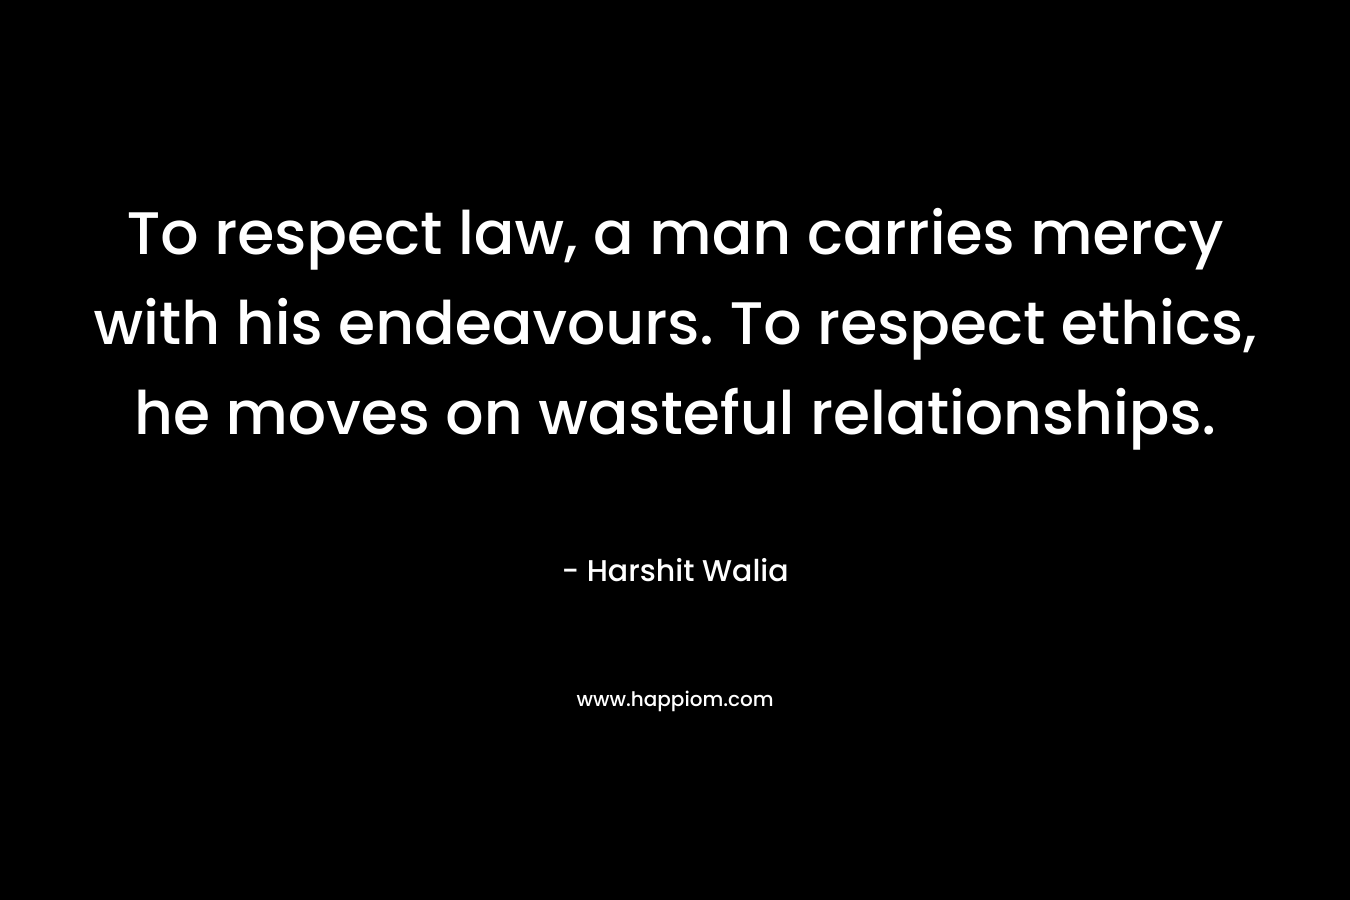 To respect law, a man carries mercy with his endeavours. To respect ethics, he moves on wasteful relationships.